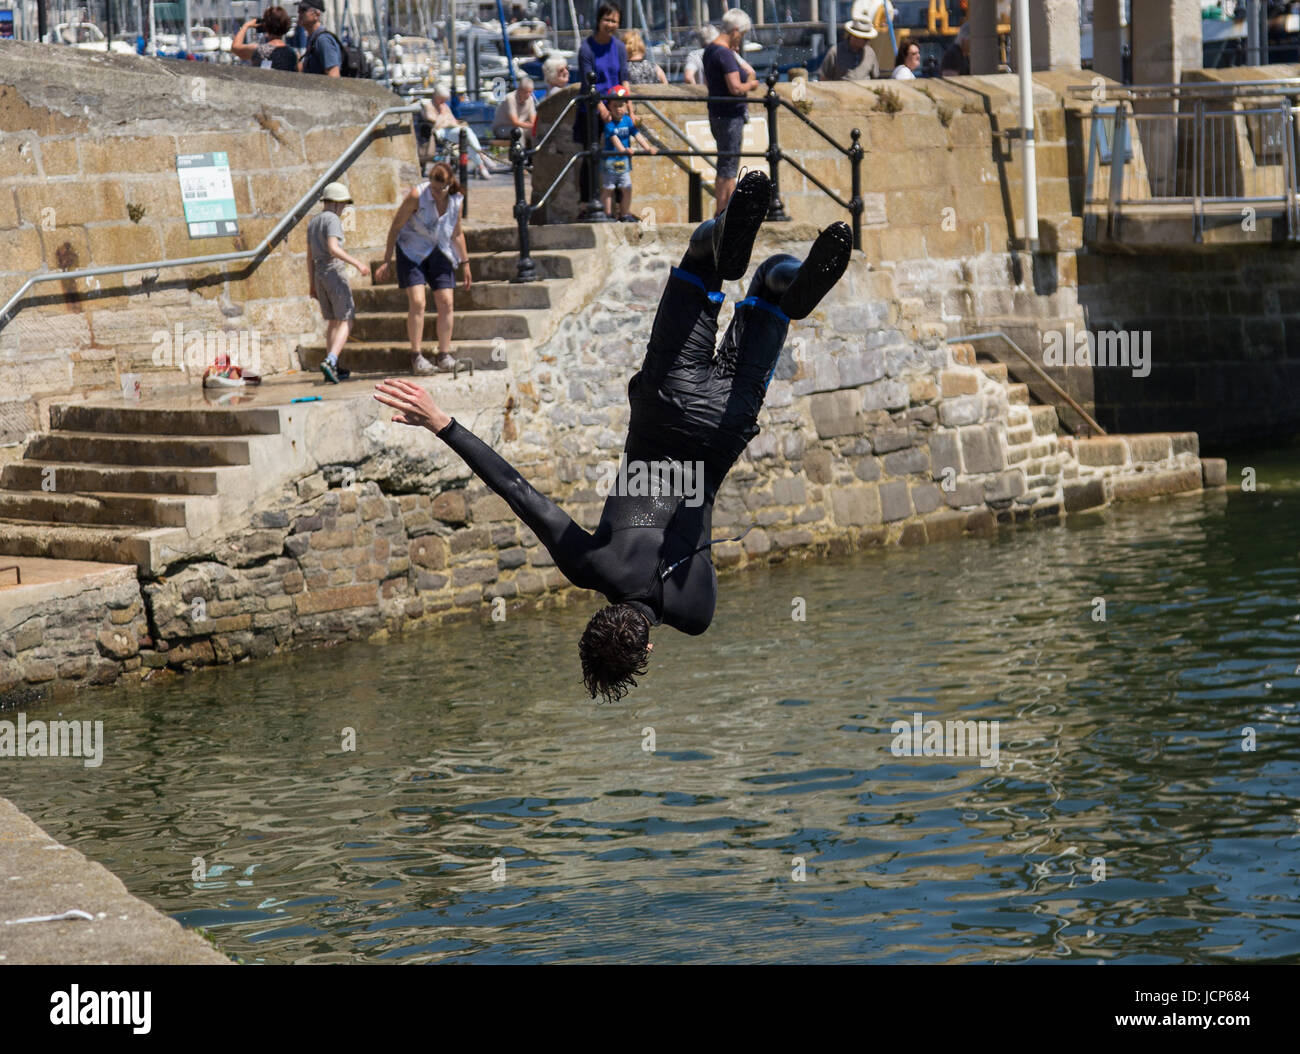 Plymouth, Devon, 17th June 17 - Young swimmers cool off by diving into the water at Barbican Wharves, Plymouth.  Credit: South West Photos/Alamy Live News Stock Photo